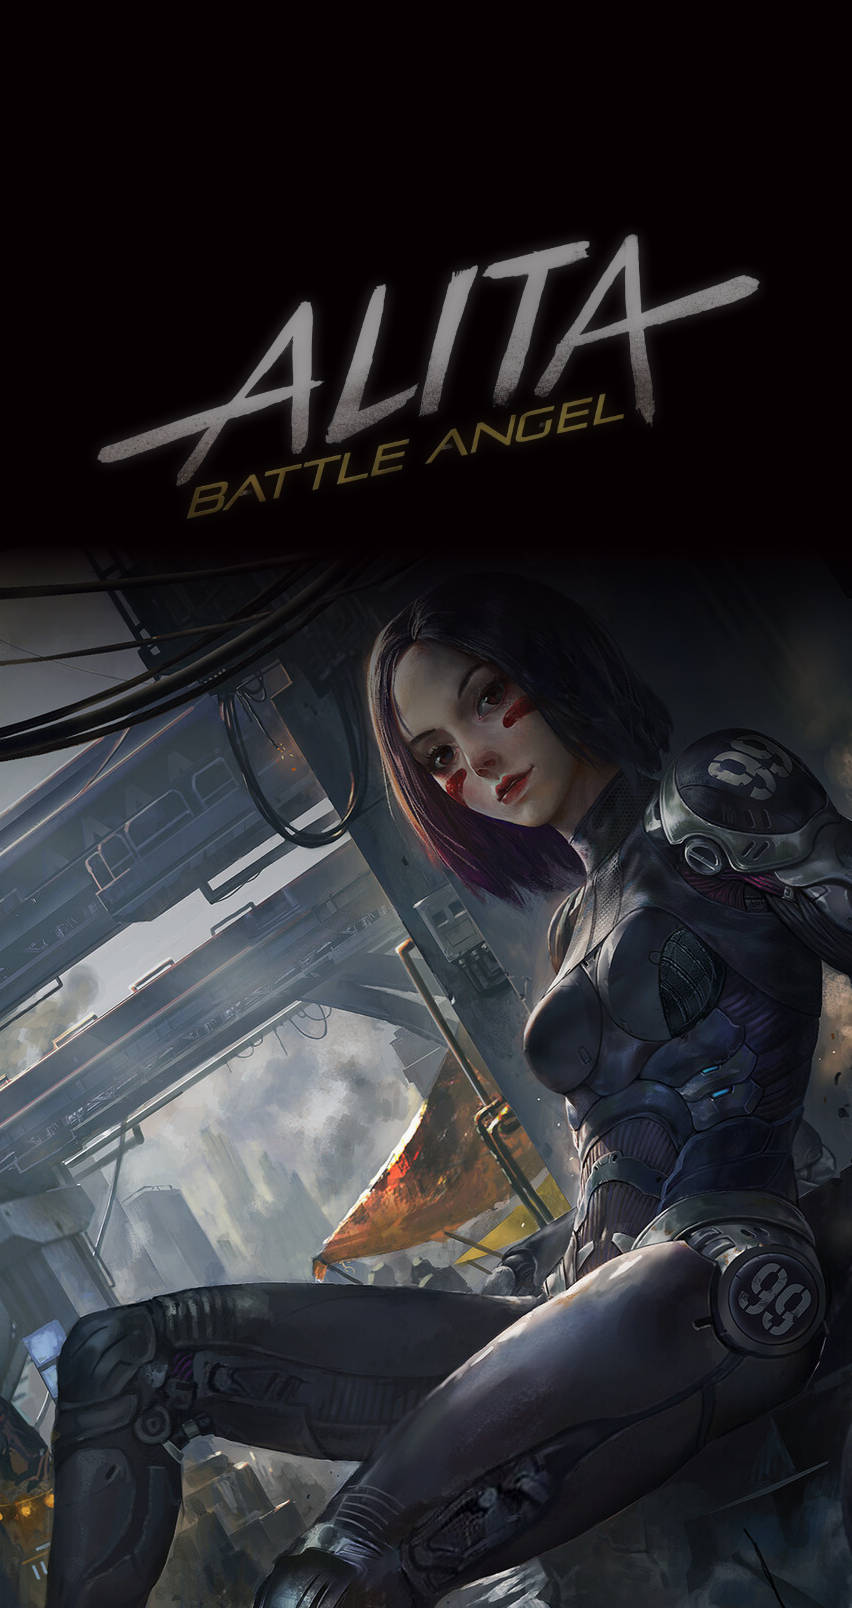 Image  Alita is ready to take on the world in her futuristic Battle Angel garb Wallpaper